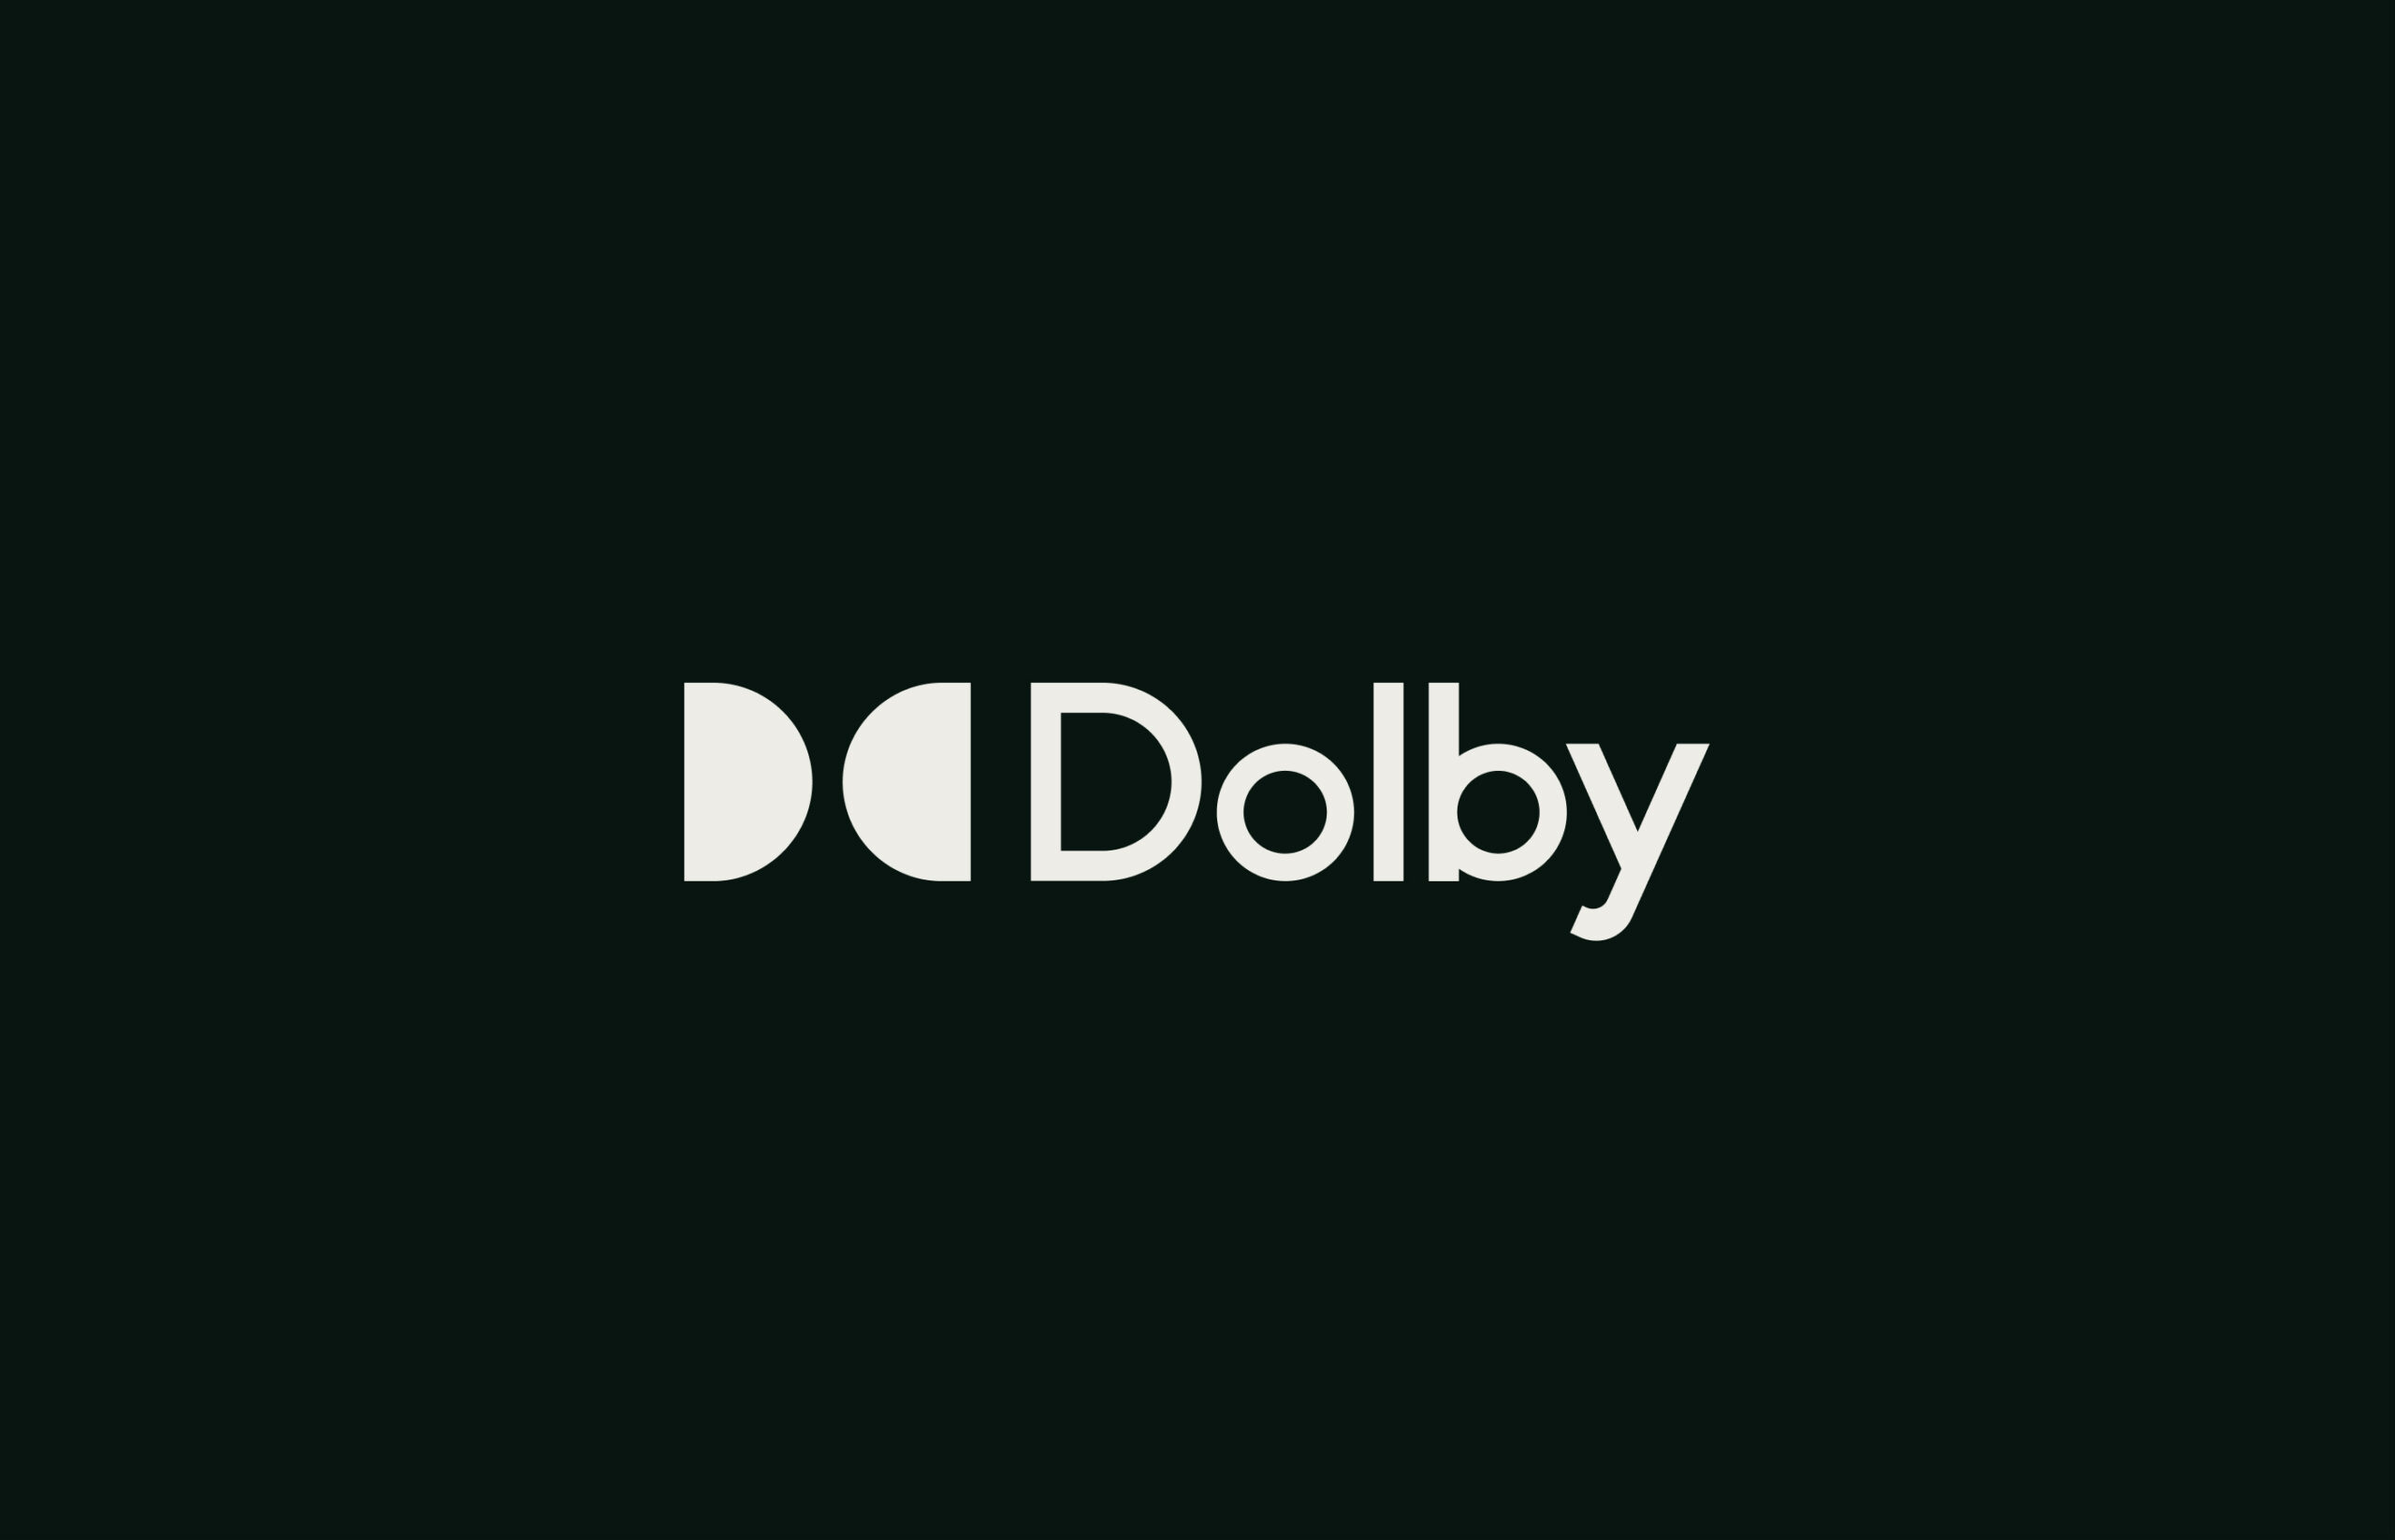 Is Dolby Atmos Music the Future? Definitely Maybe